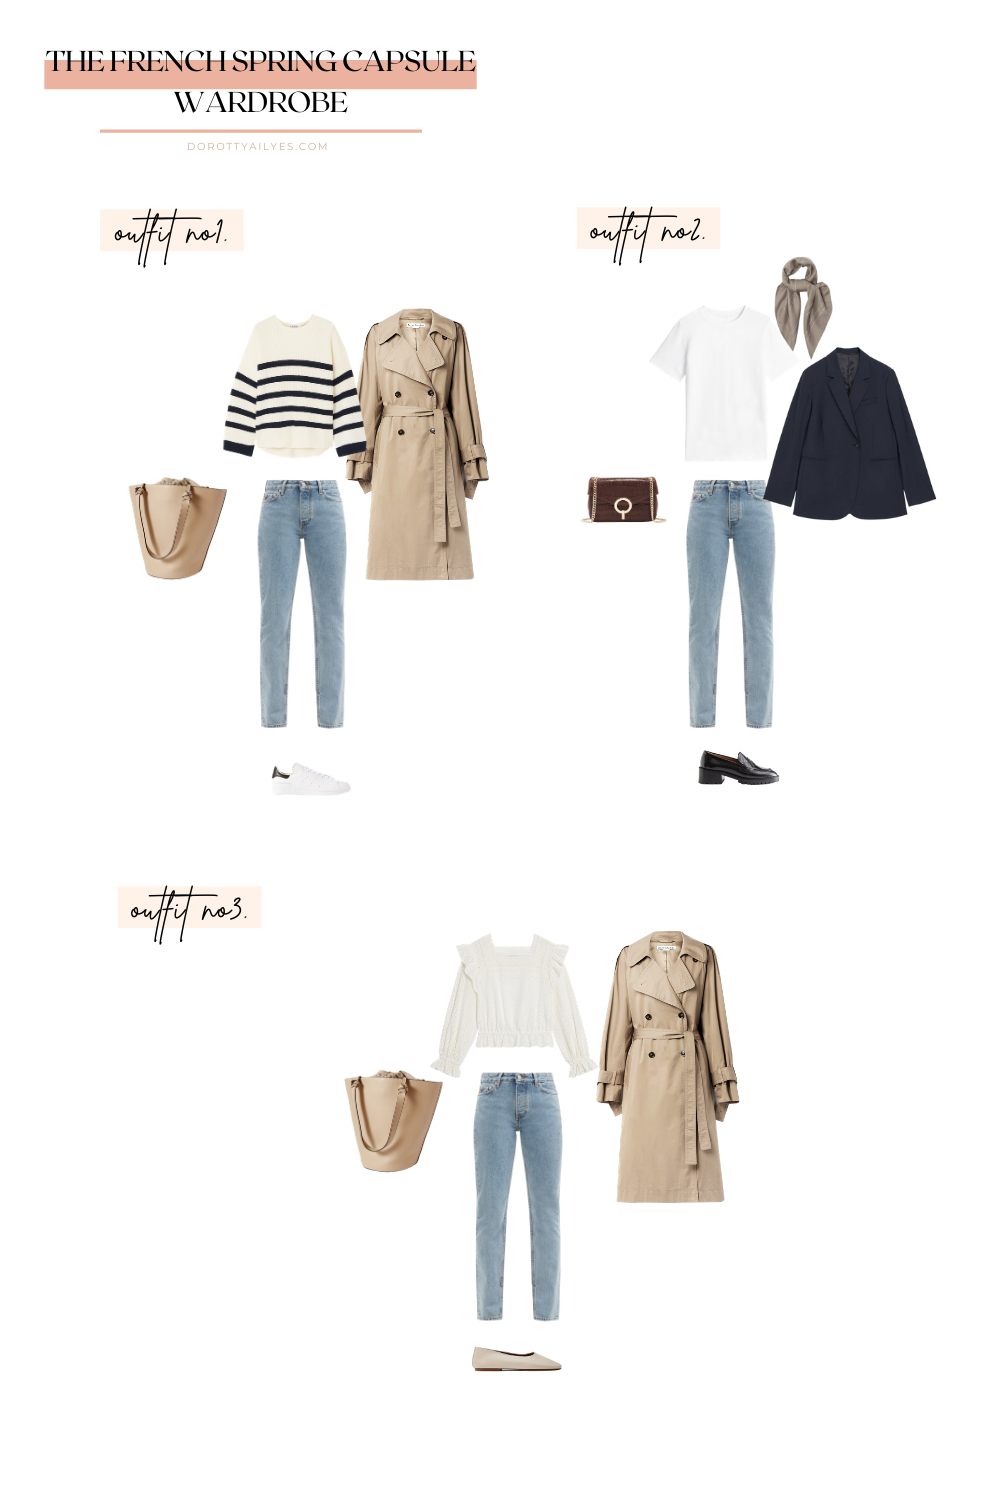 How To Build A Spring Capsule Wardrobe The French Way — Dorottya Ilyes